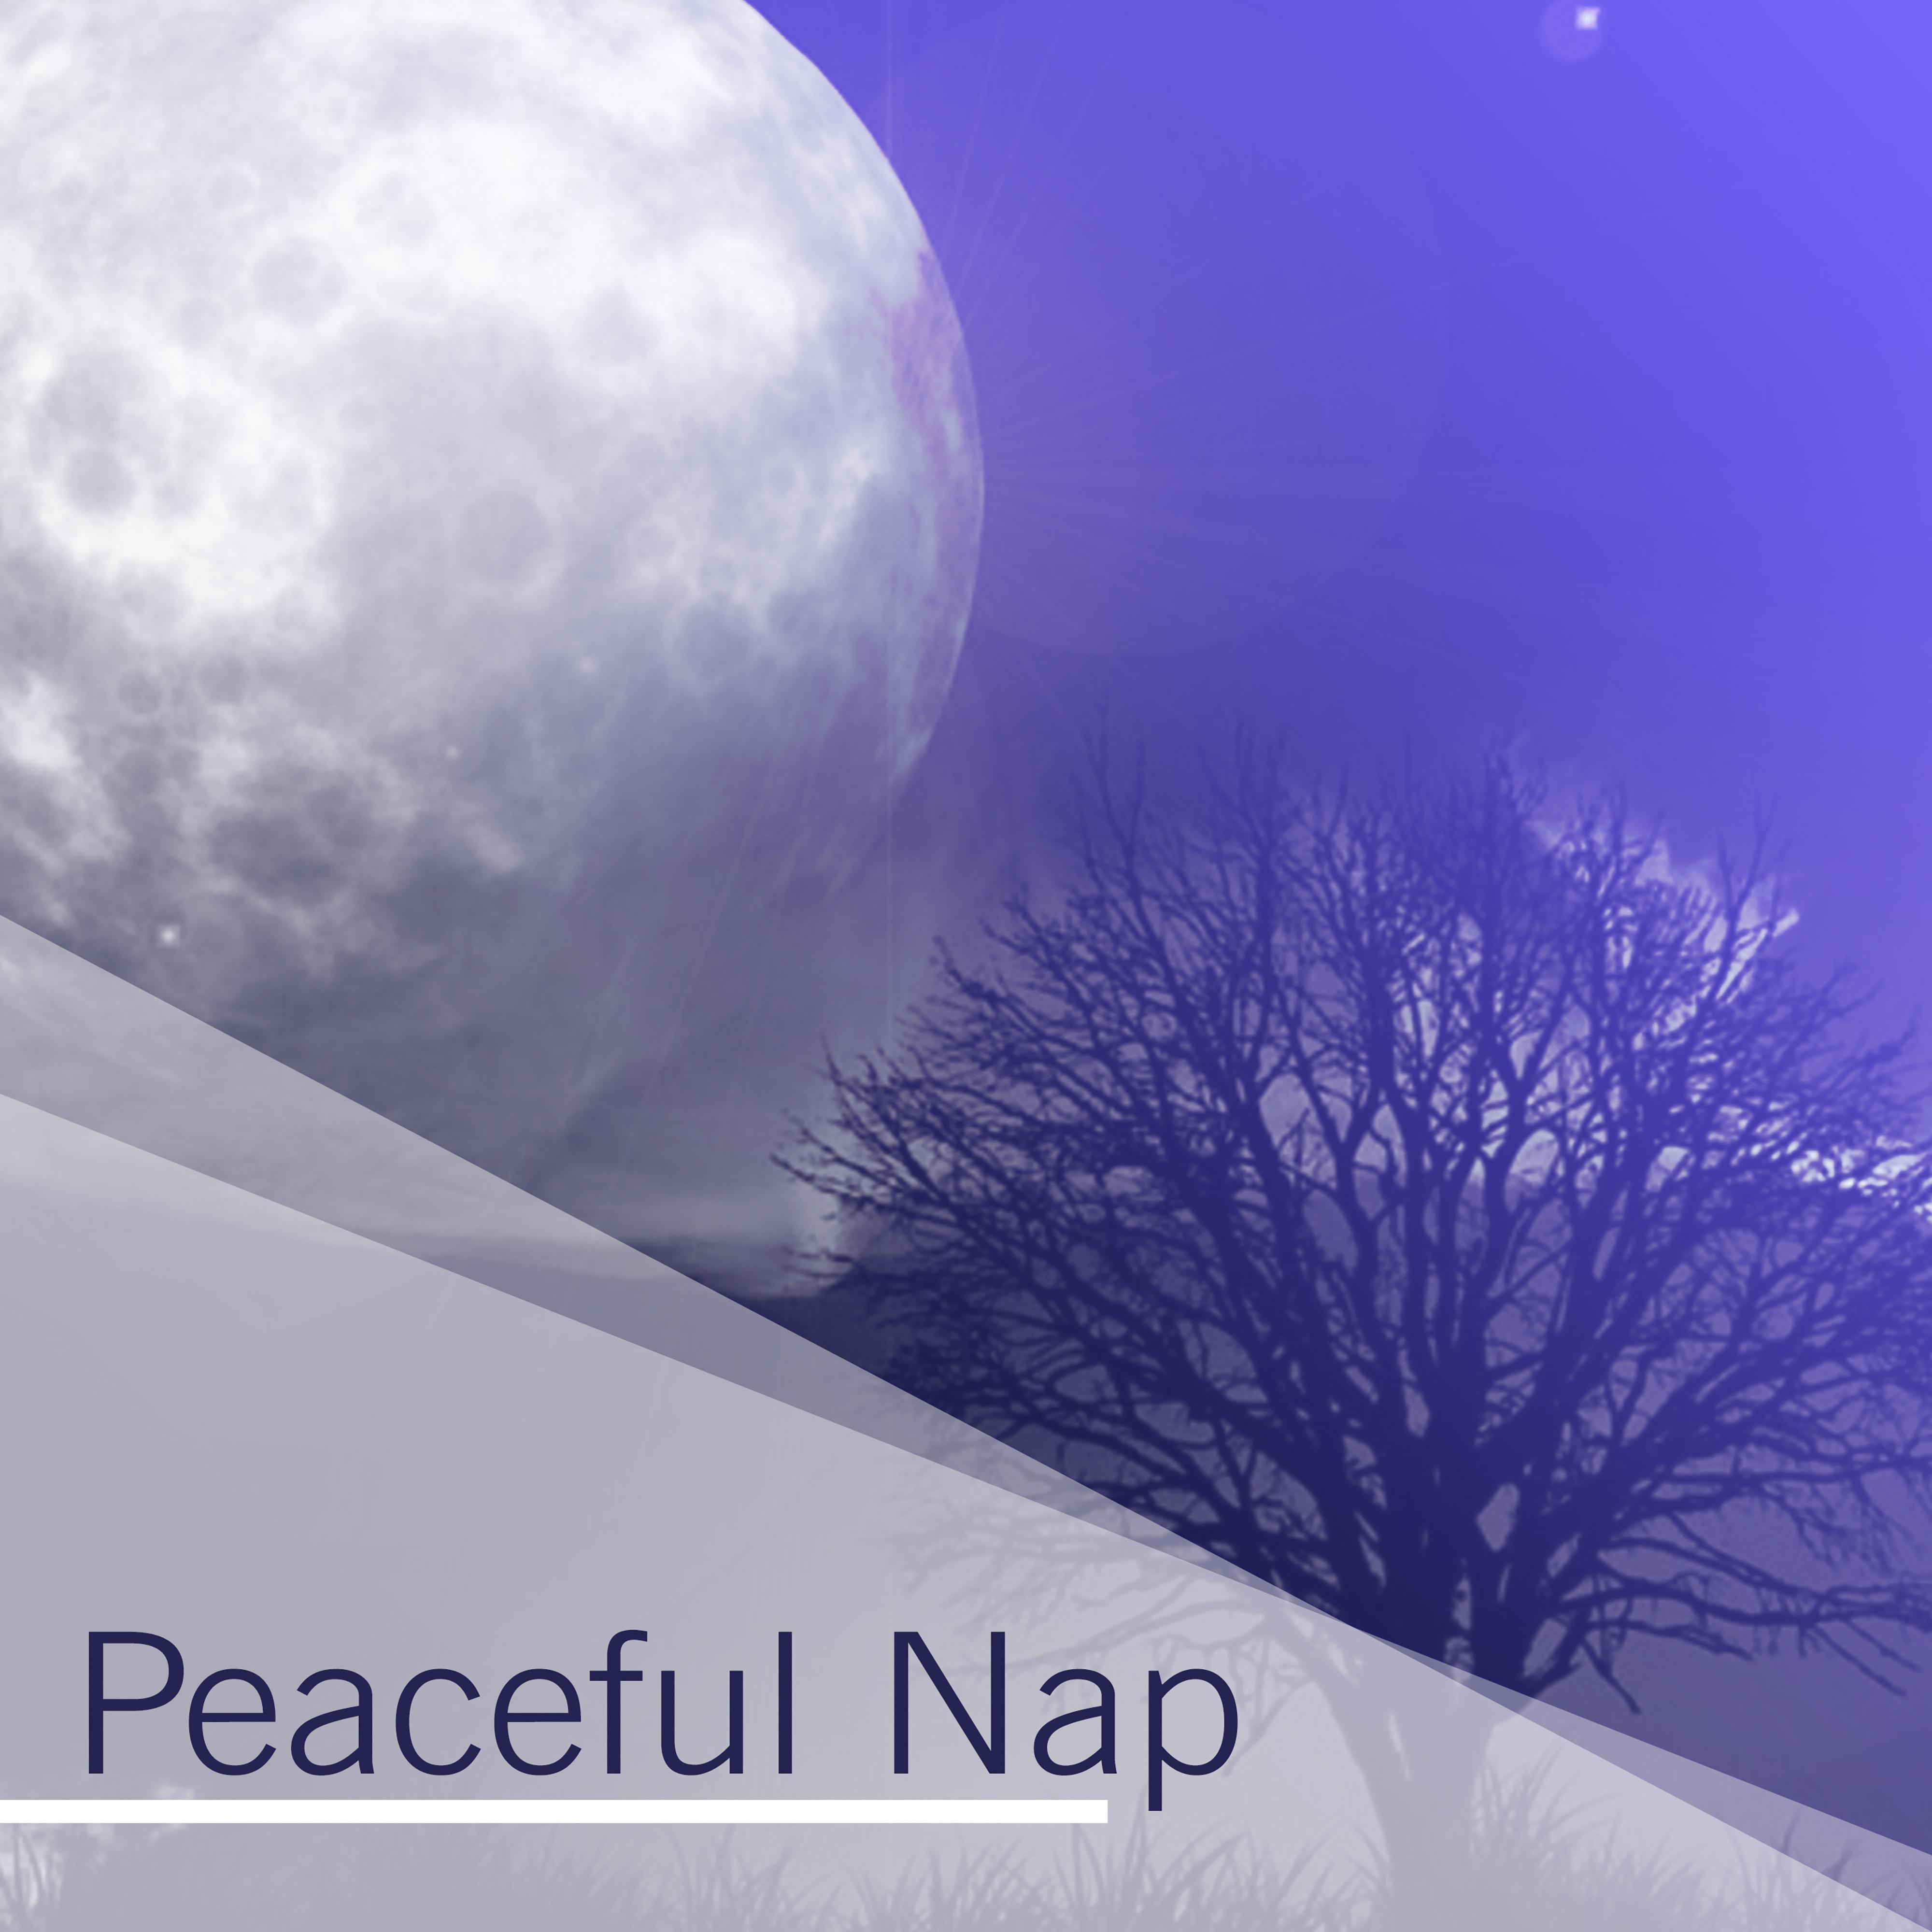 Peaceful Nap  Relaxing Music at Goodnight, Restful Sleep, Nature Sounds to Pillow, Sweet Dreams, Lullaby